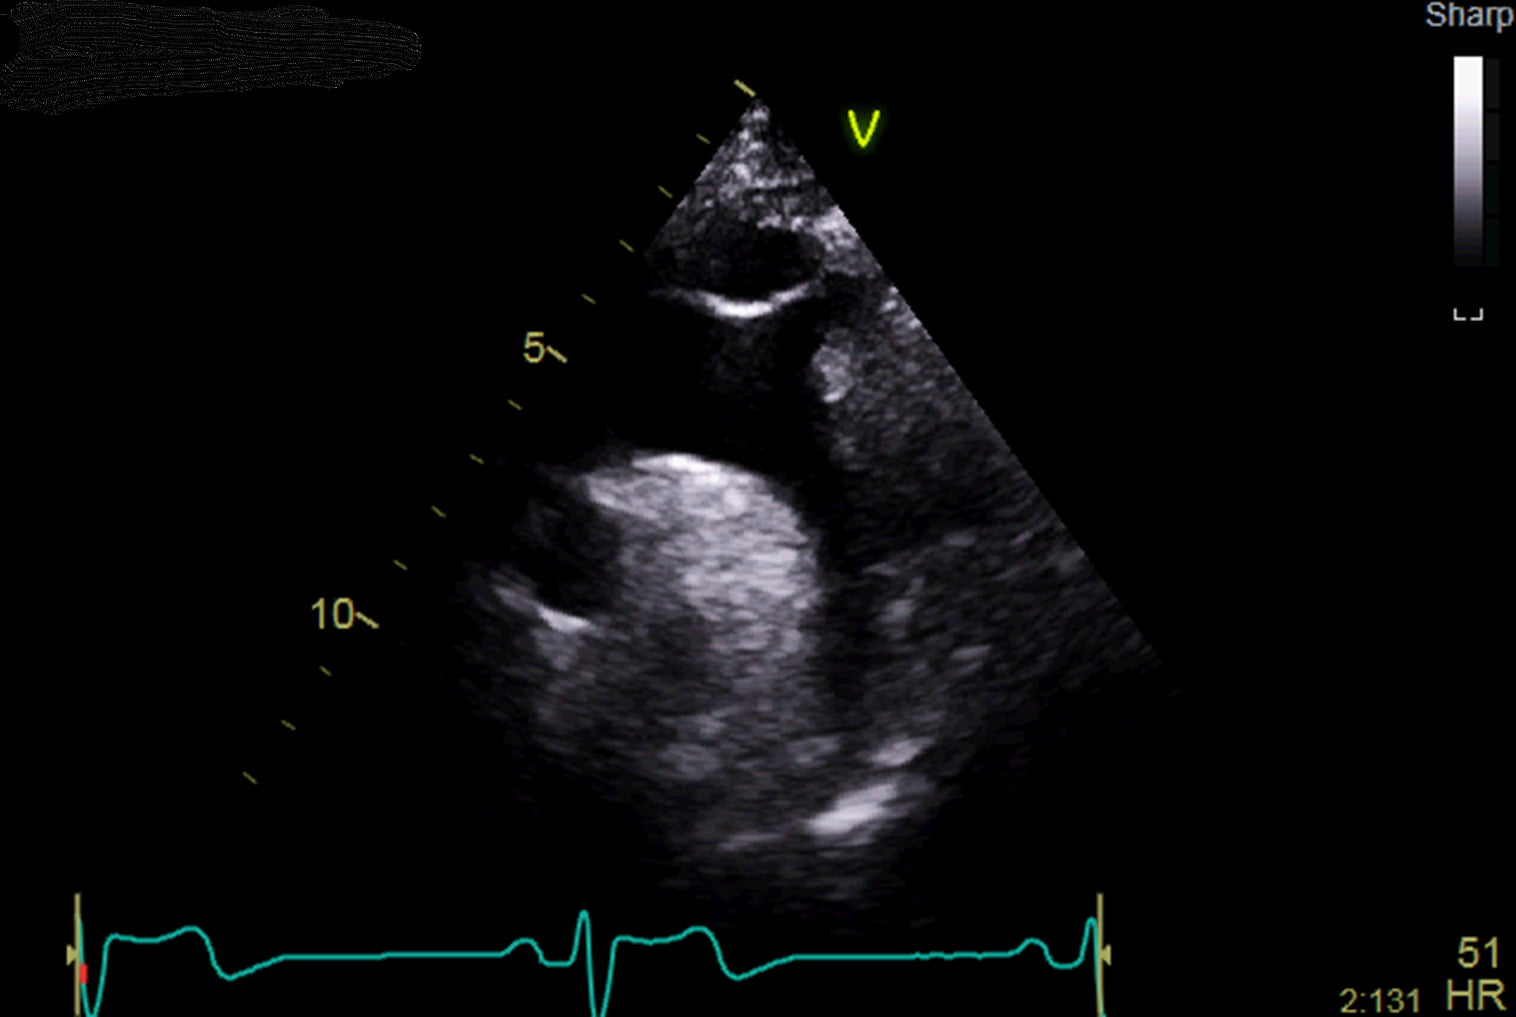 echocardiogram showing the aorta in the heart